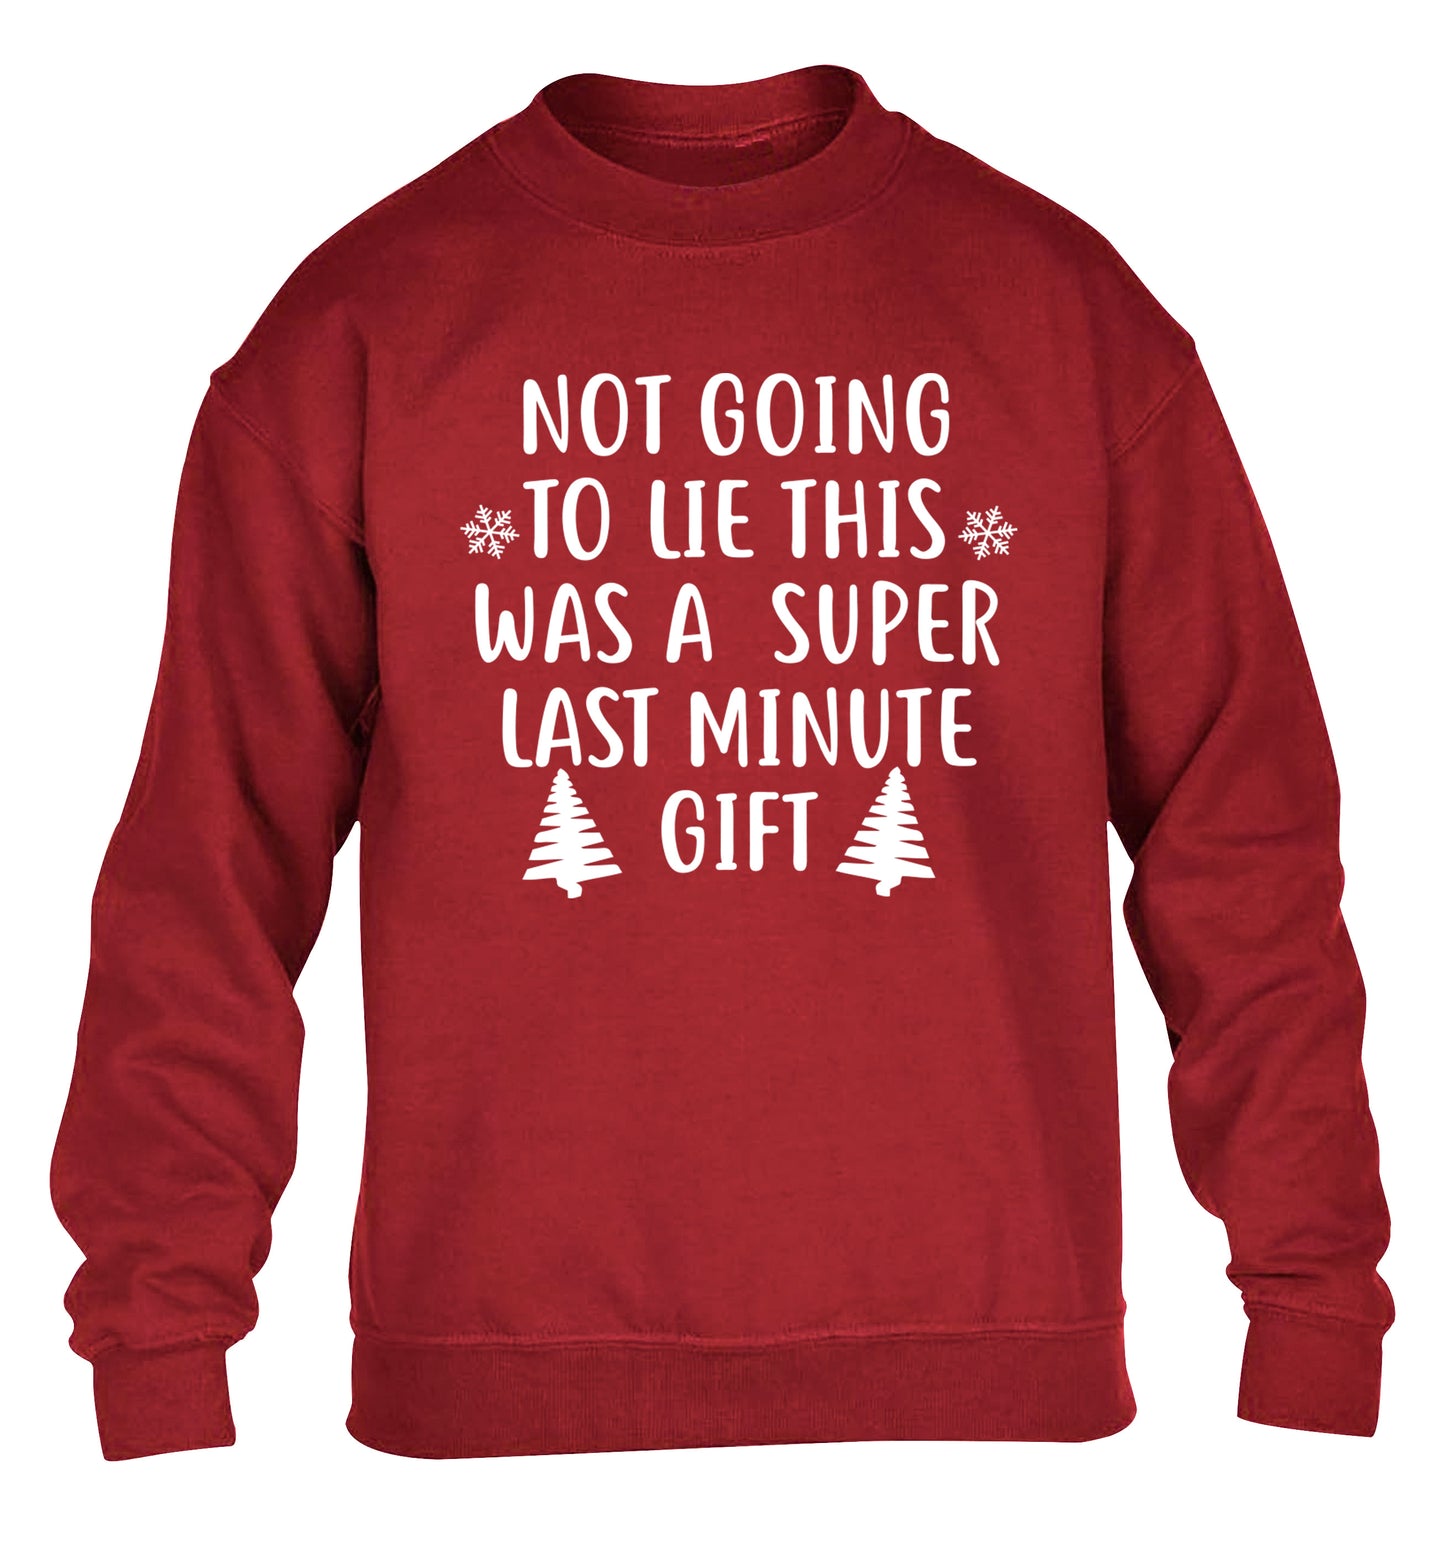 Not going to lie this was a super last minute gift children's grey sweater 12-13 Years